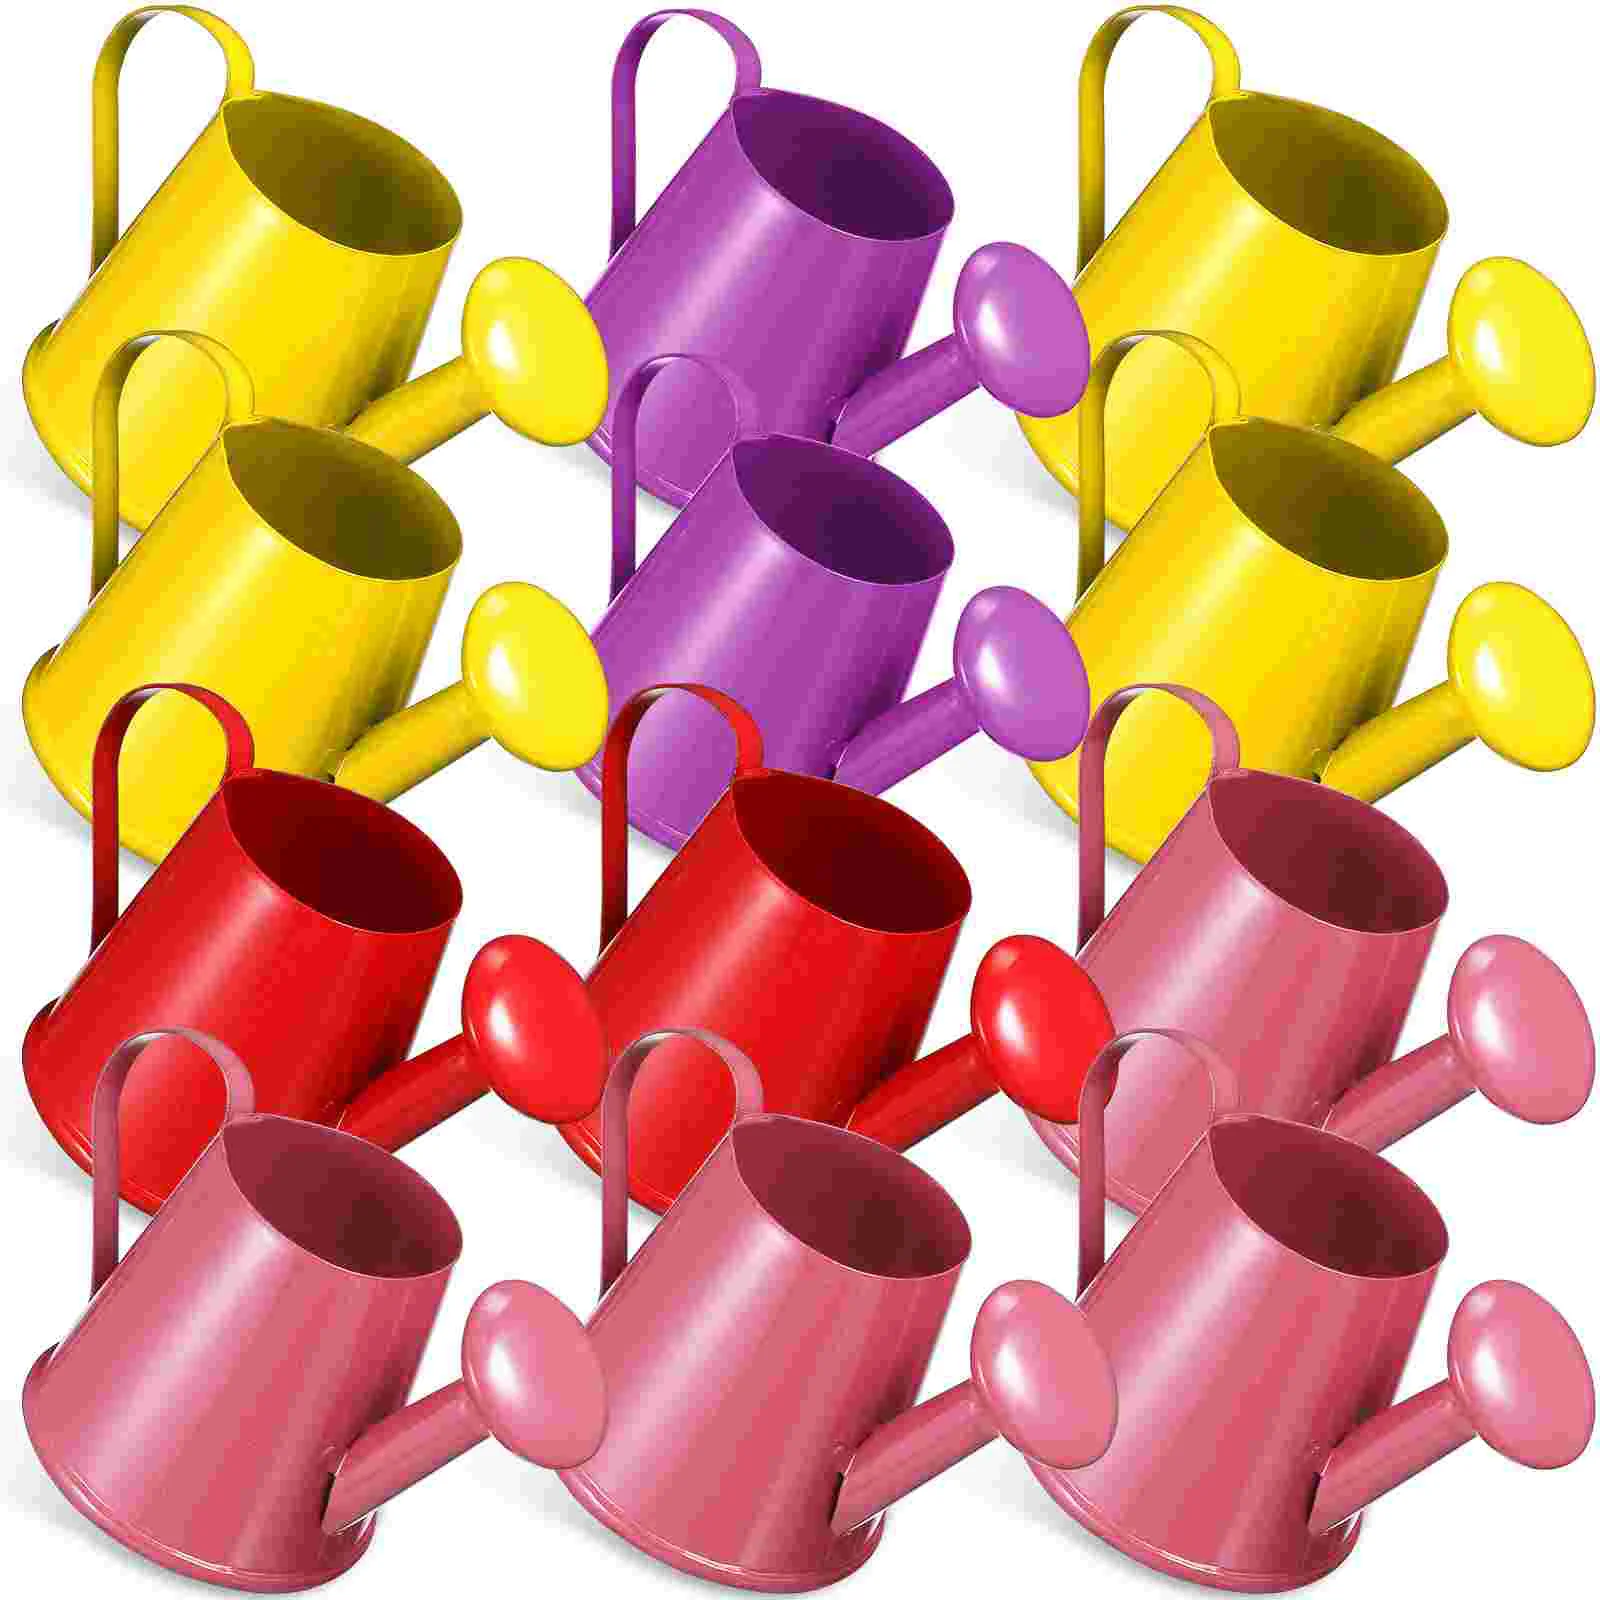 

12 Pcs Mini Super Small Pouring Watering Kettles Bath Toy Can Metal Cans Vase Juicy